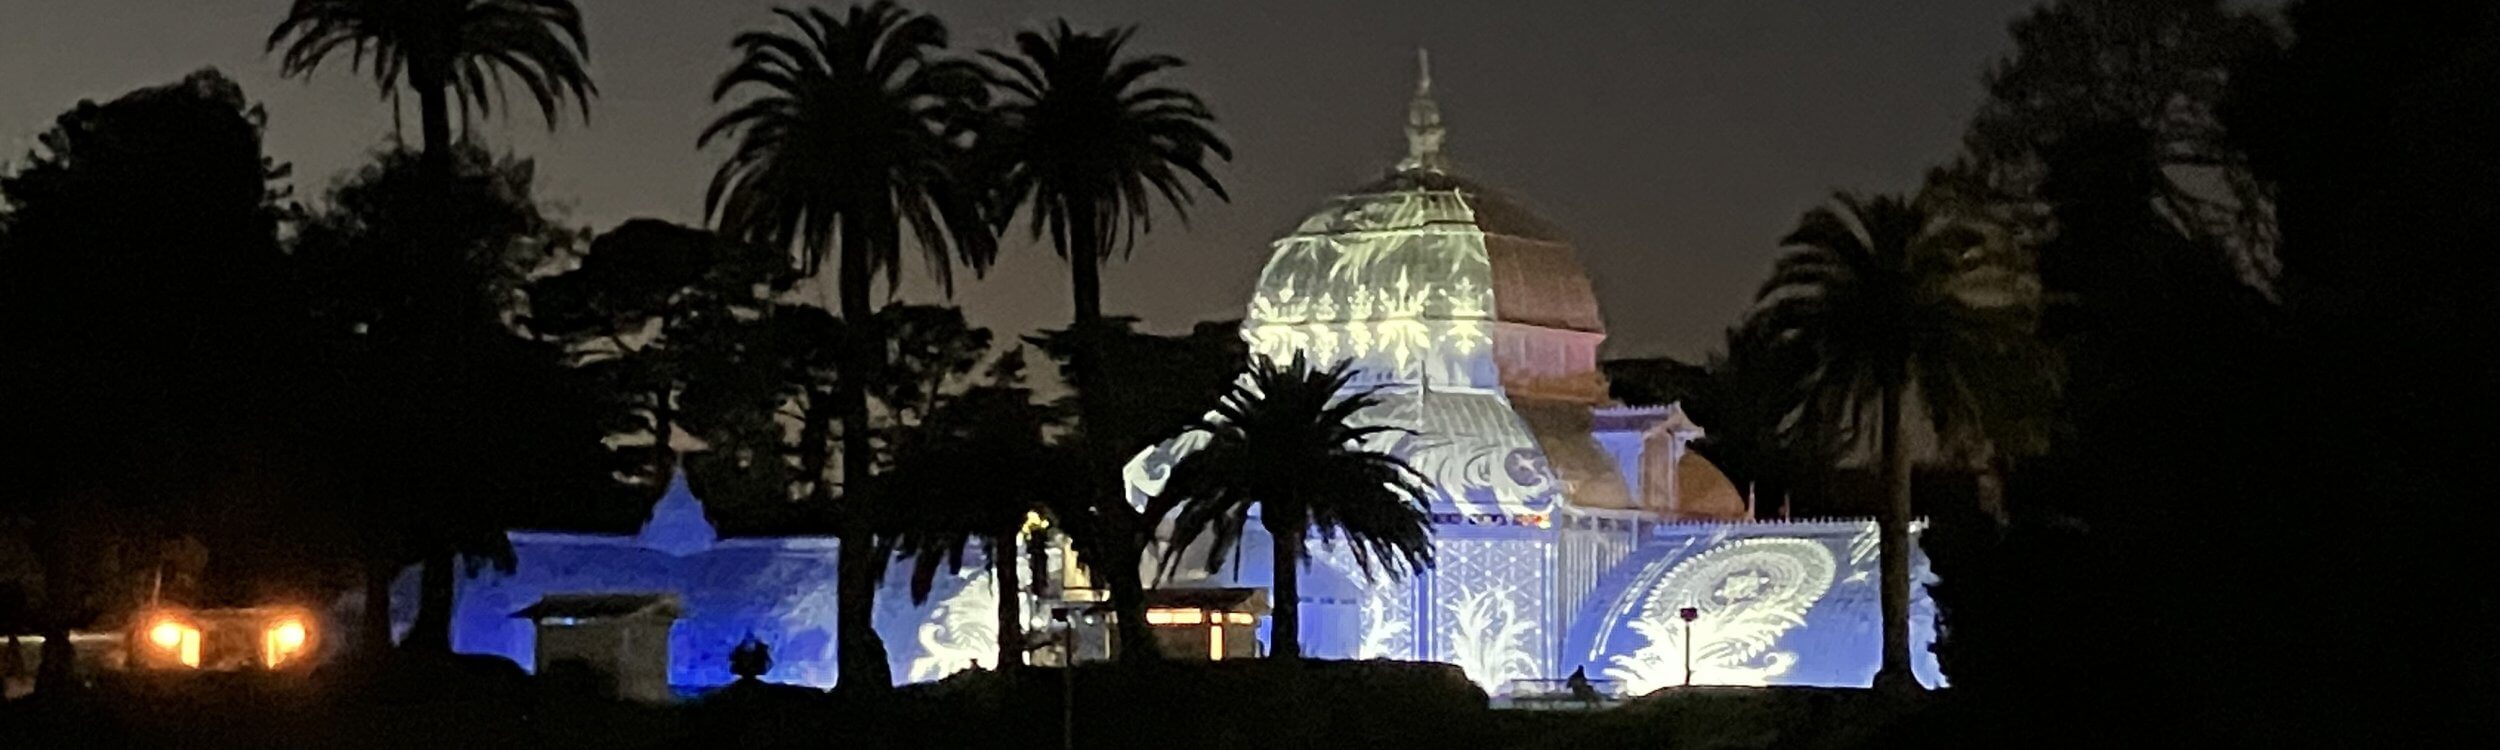 Five wintery walks to see holiday lights in San Francisco